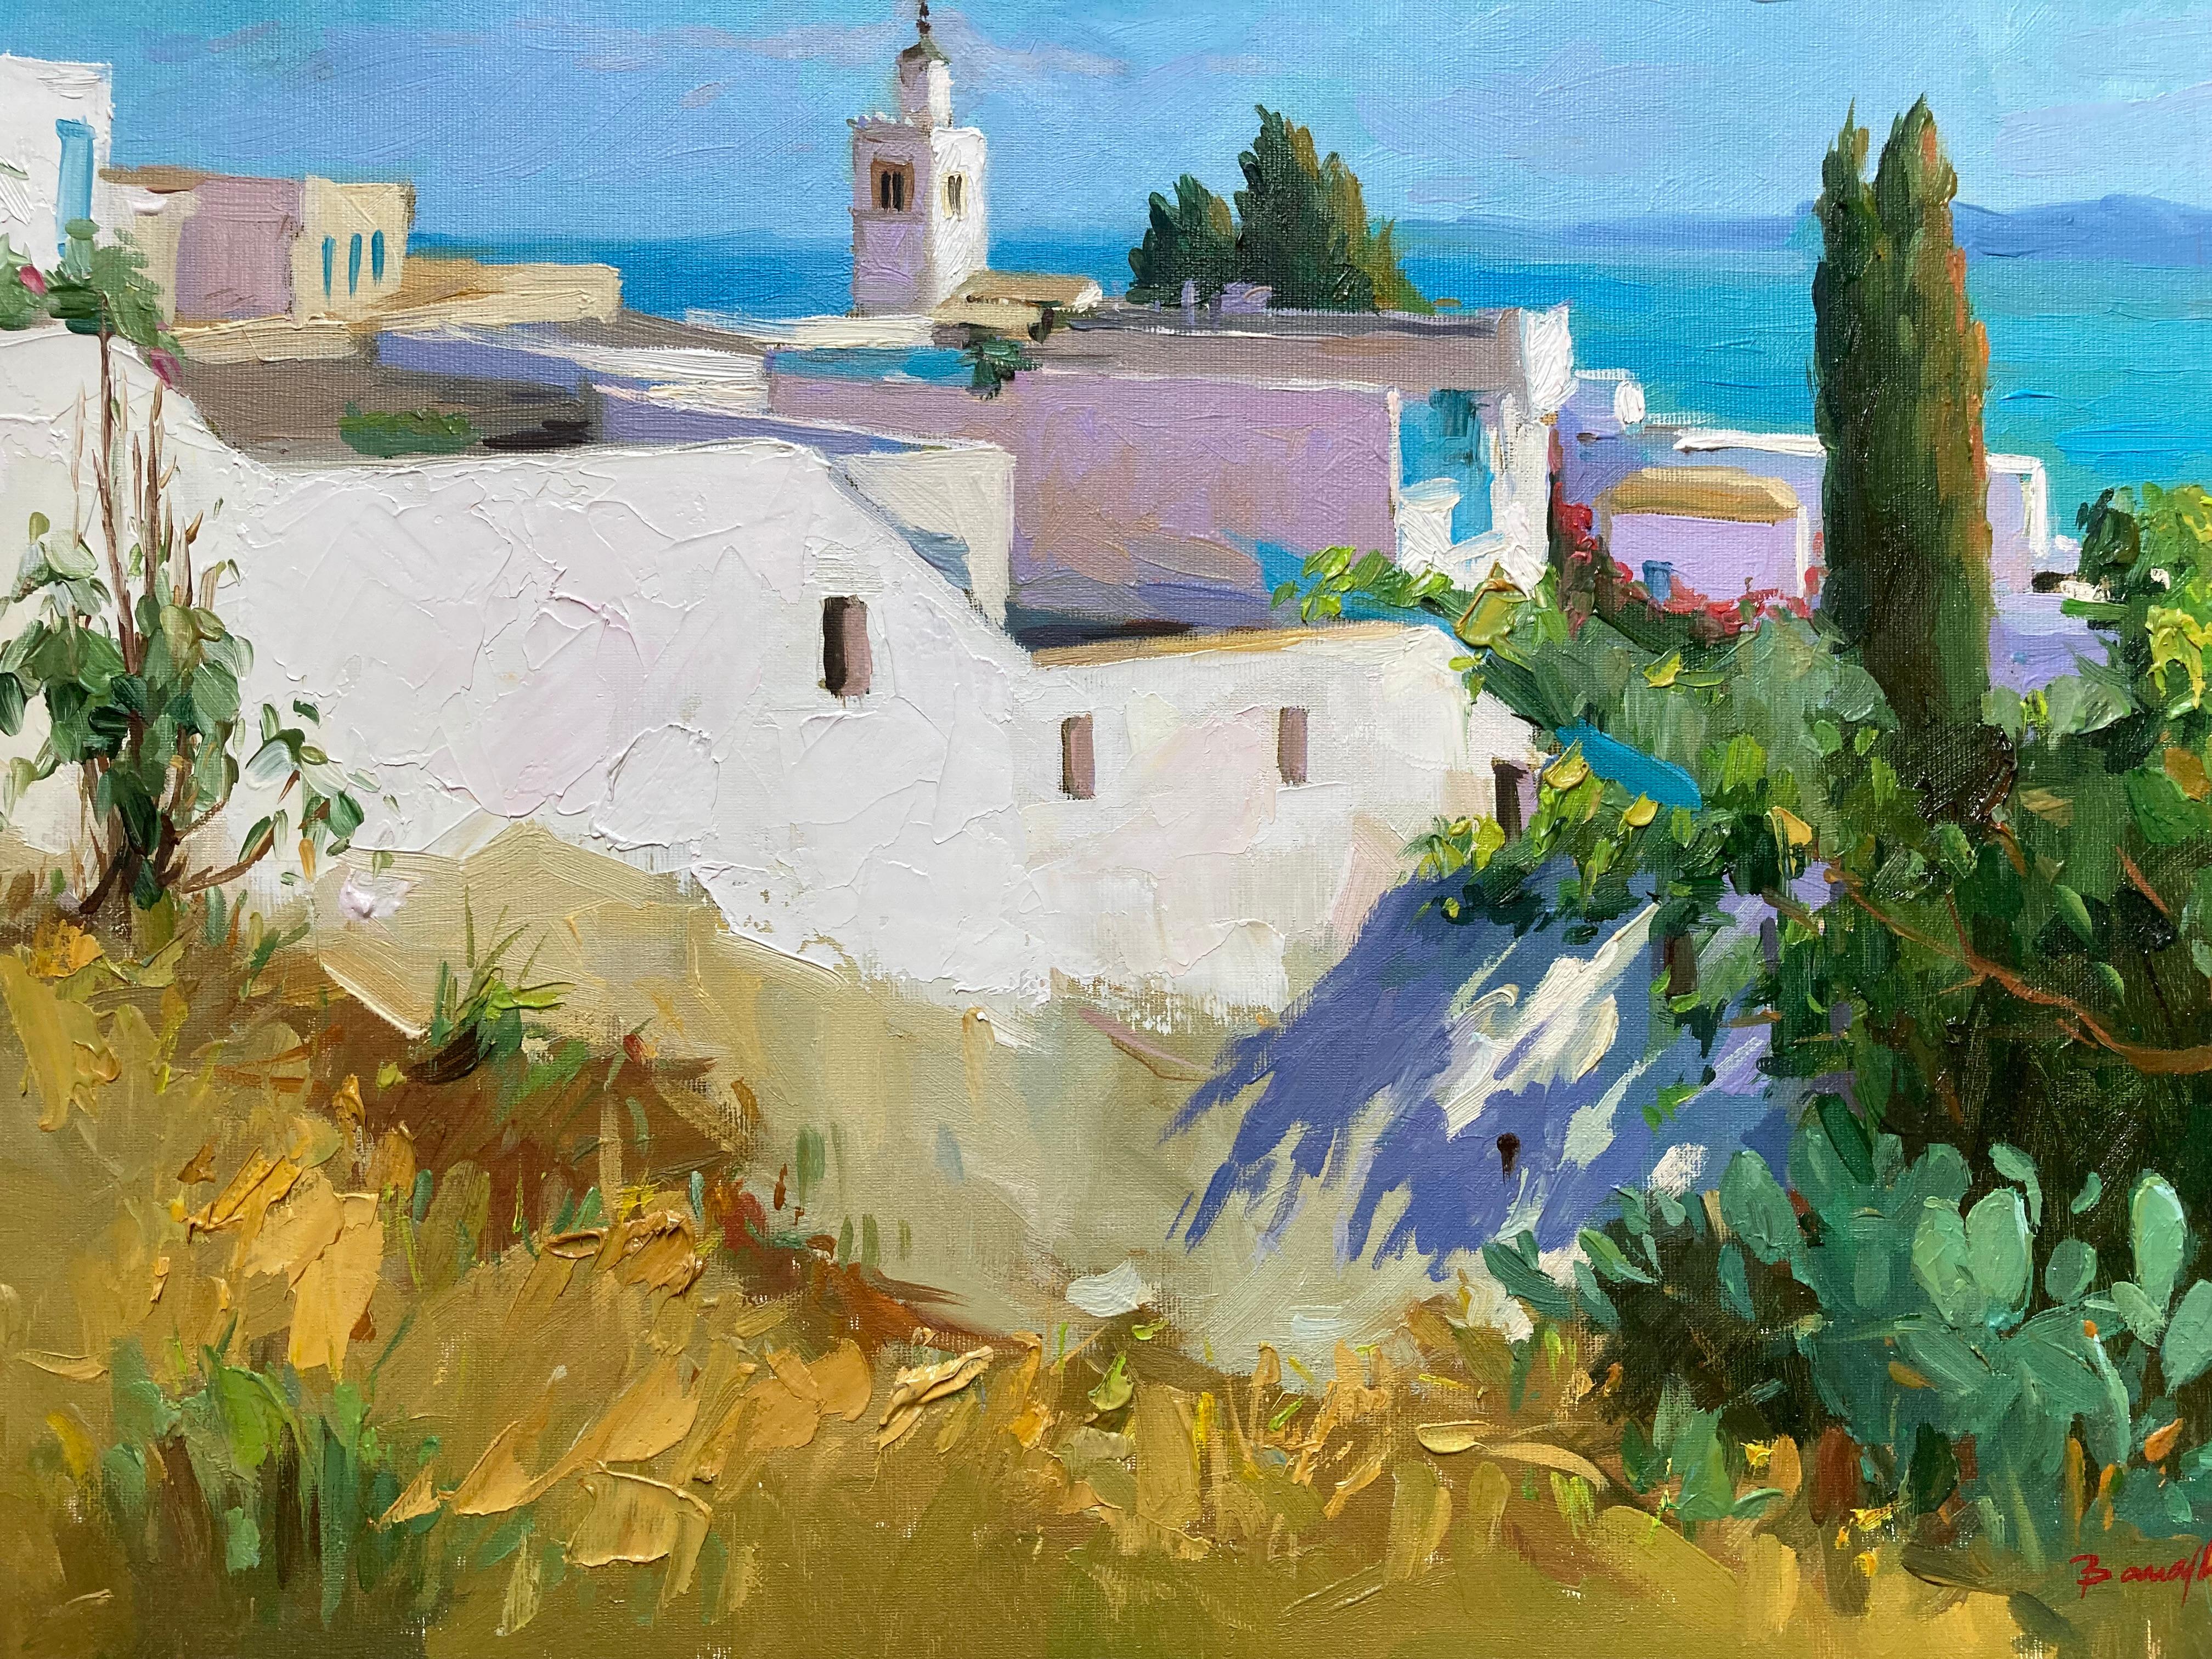 Greece Island Scene (Contemporary Impressionist Landscape Village Painting) - Blue Landscape Painting by Unknown